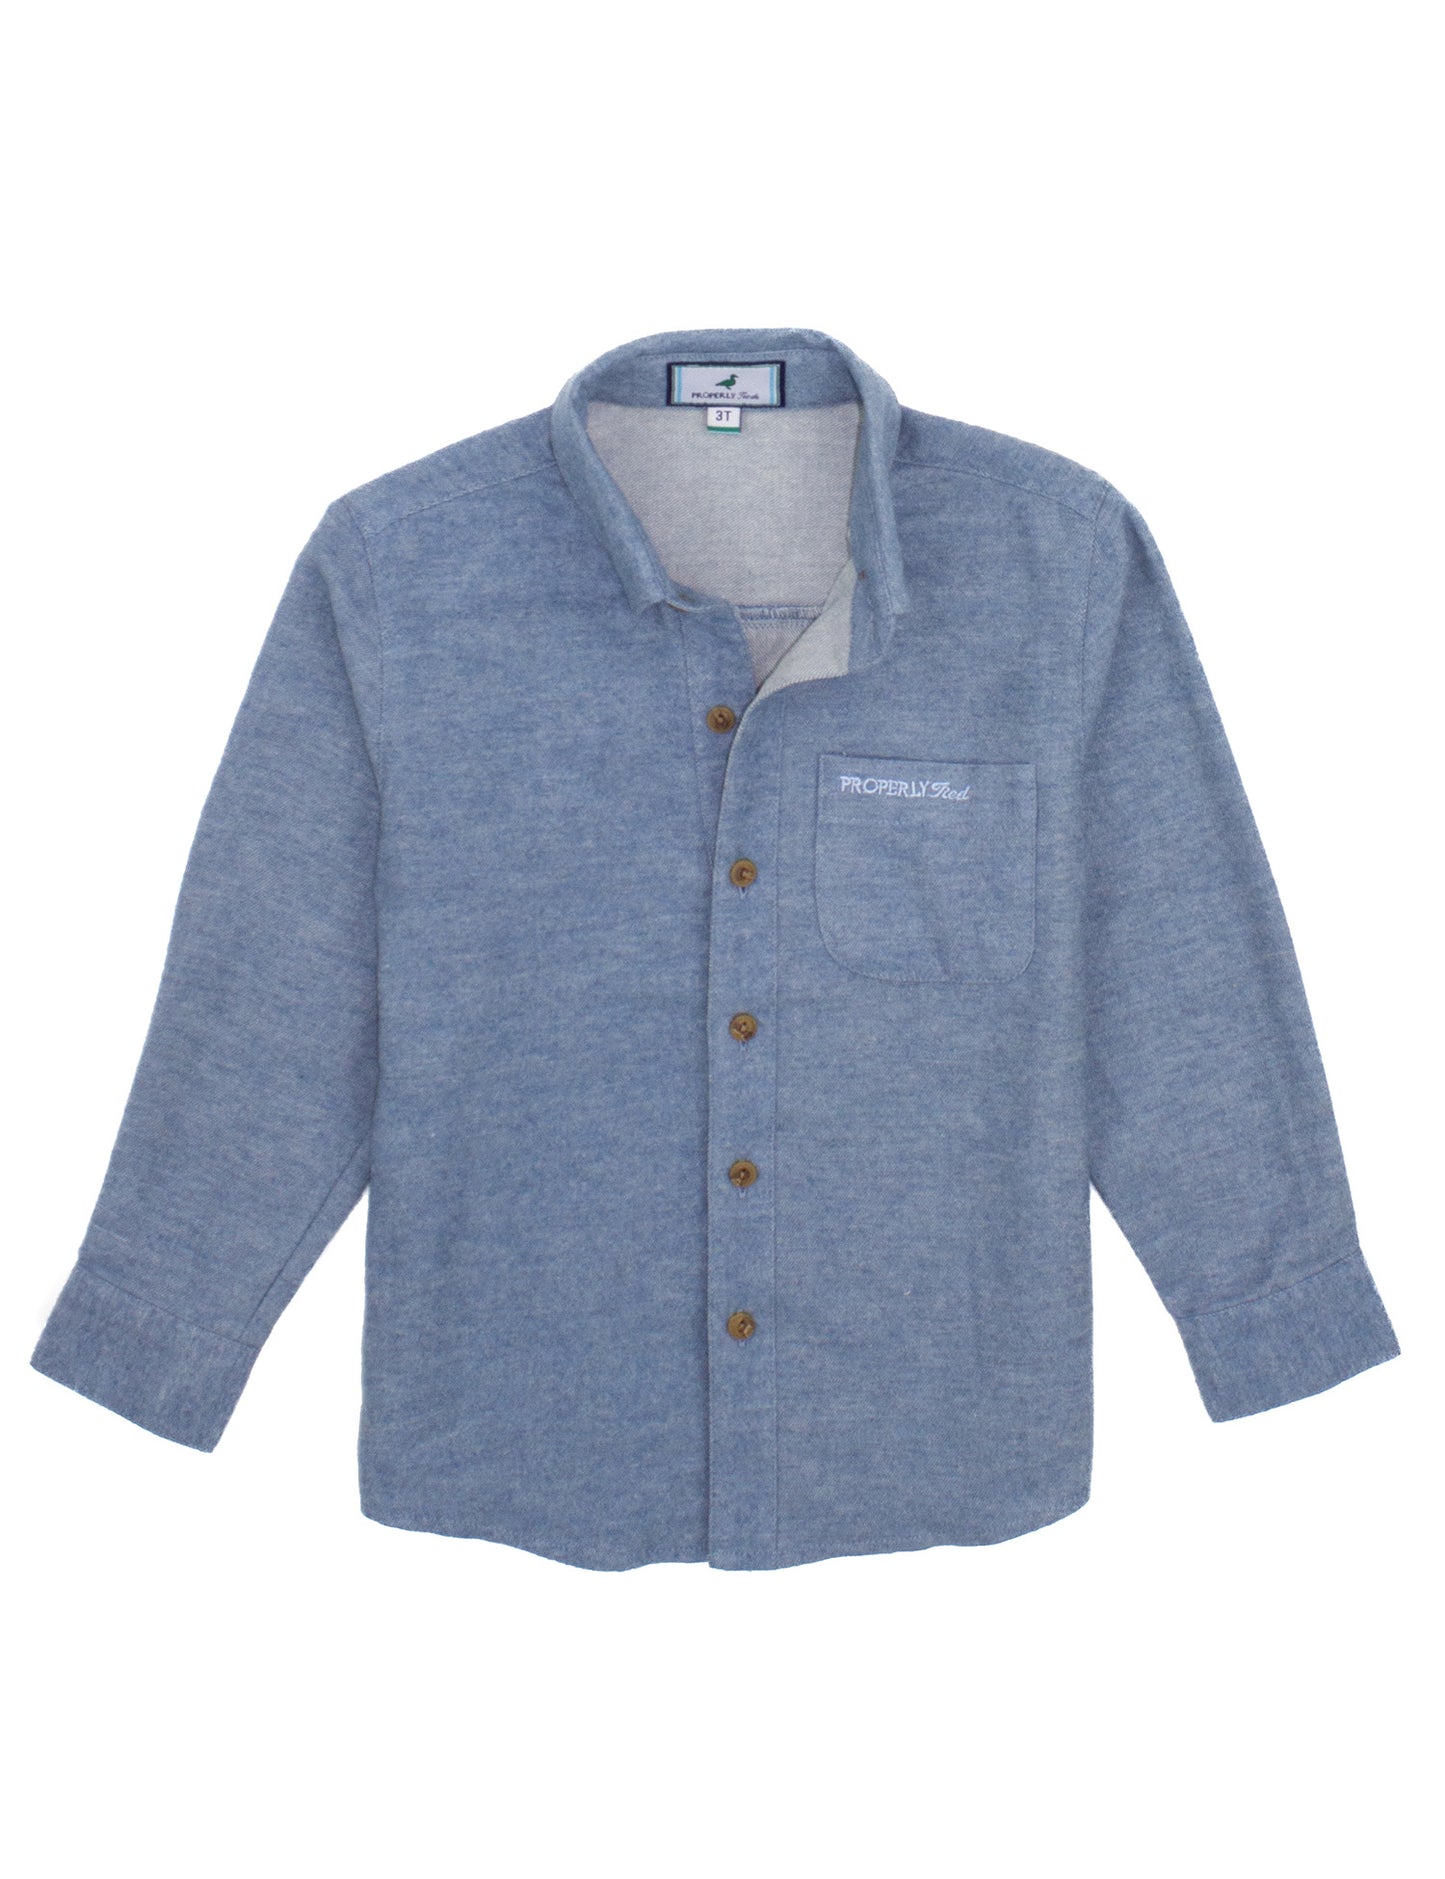 Properly Tied LS Washed Blue Shirt